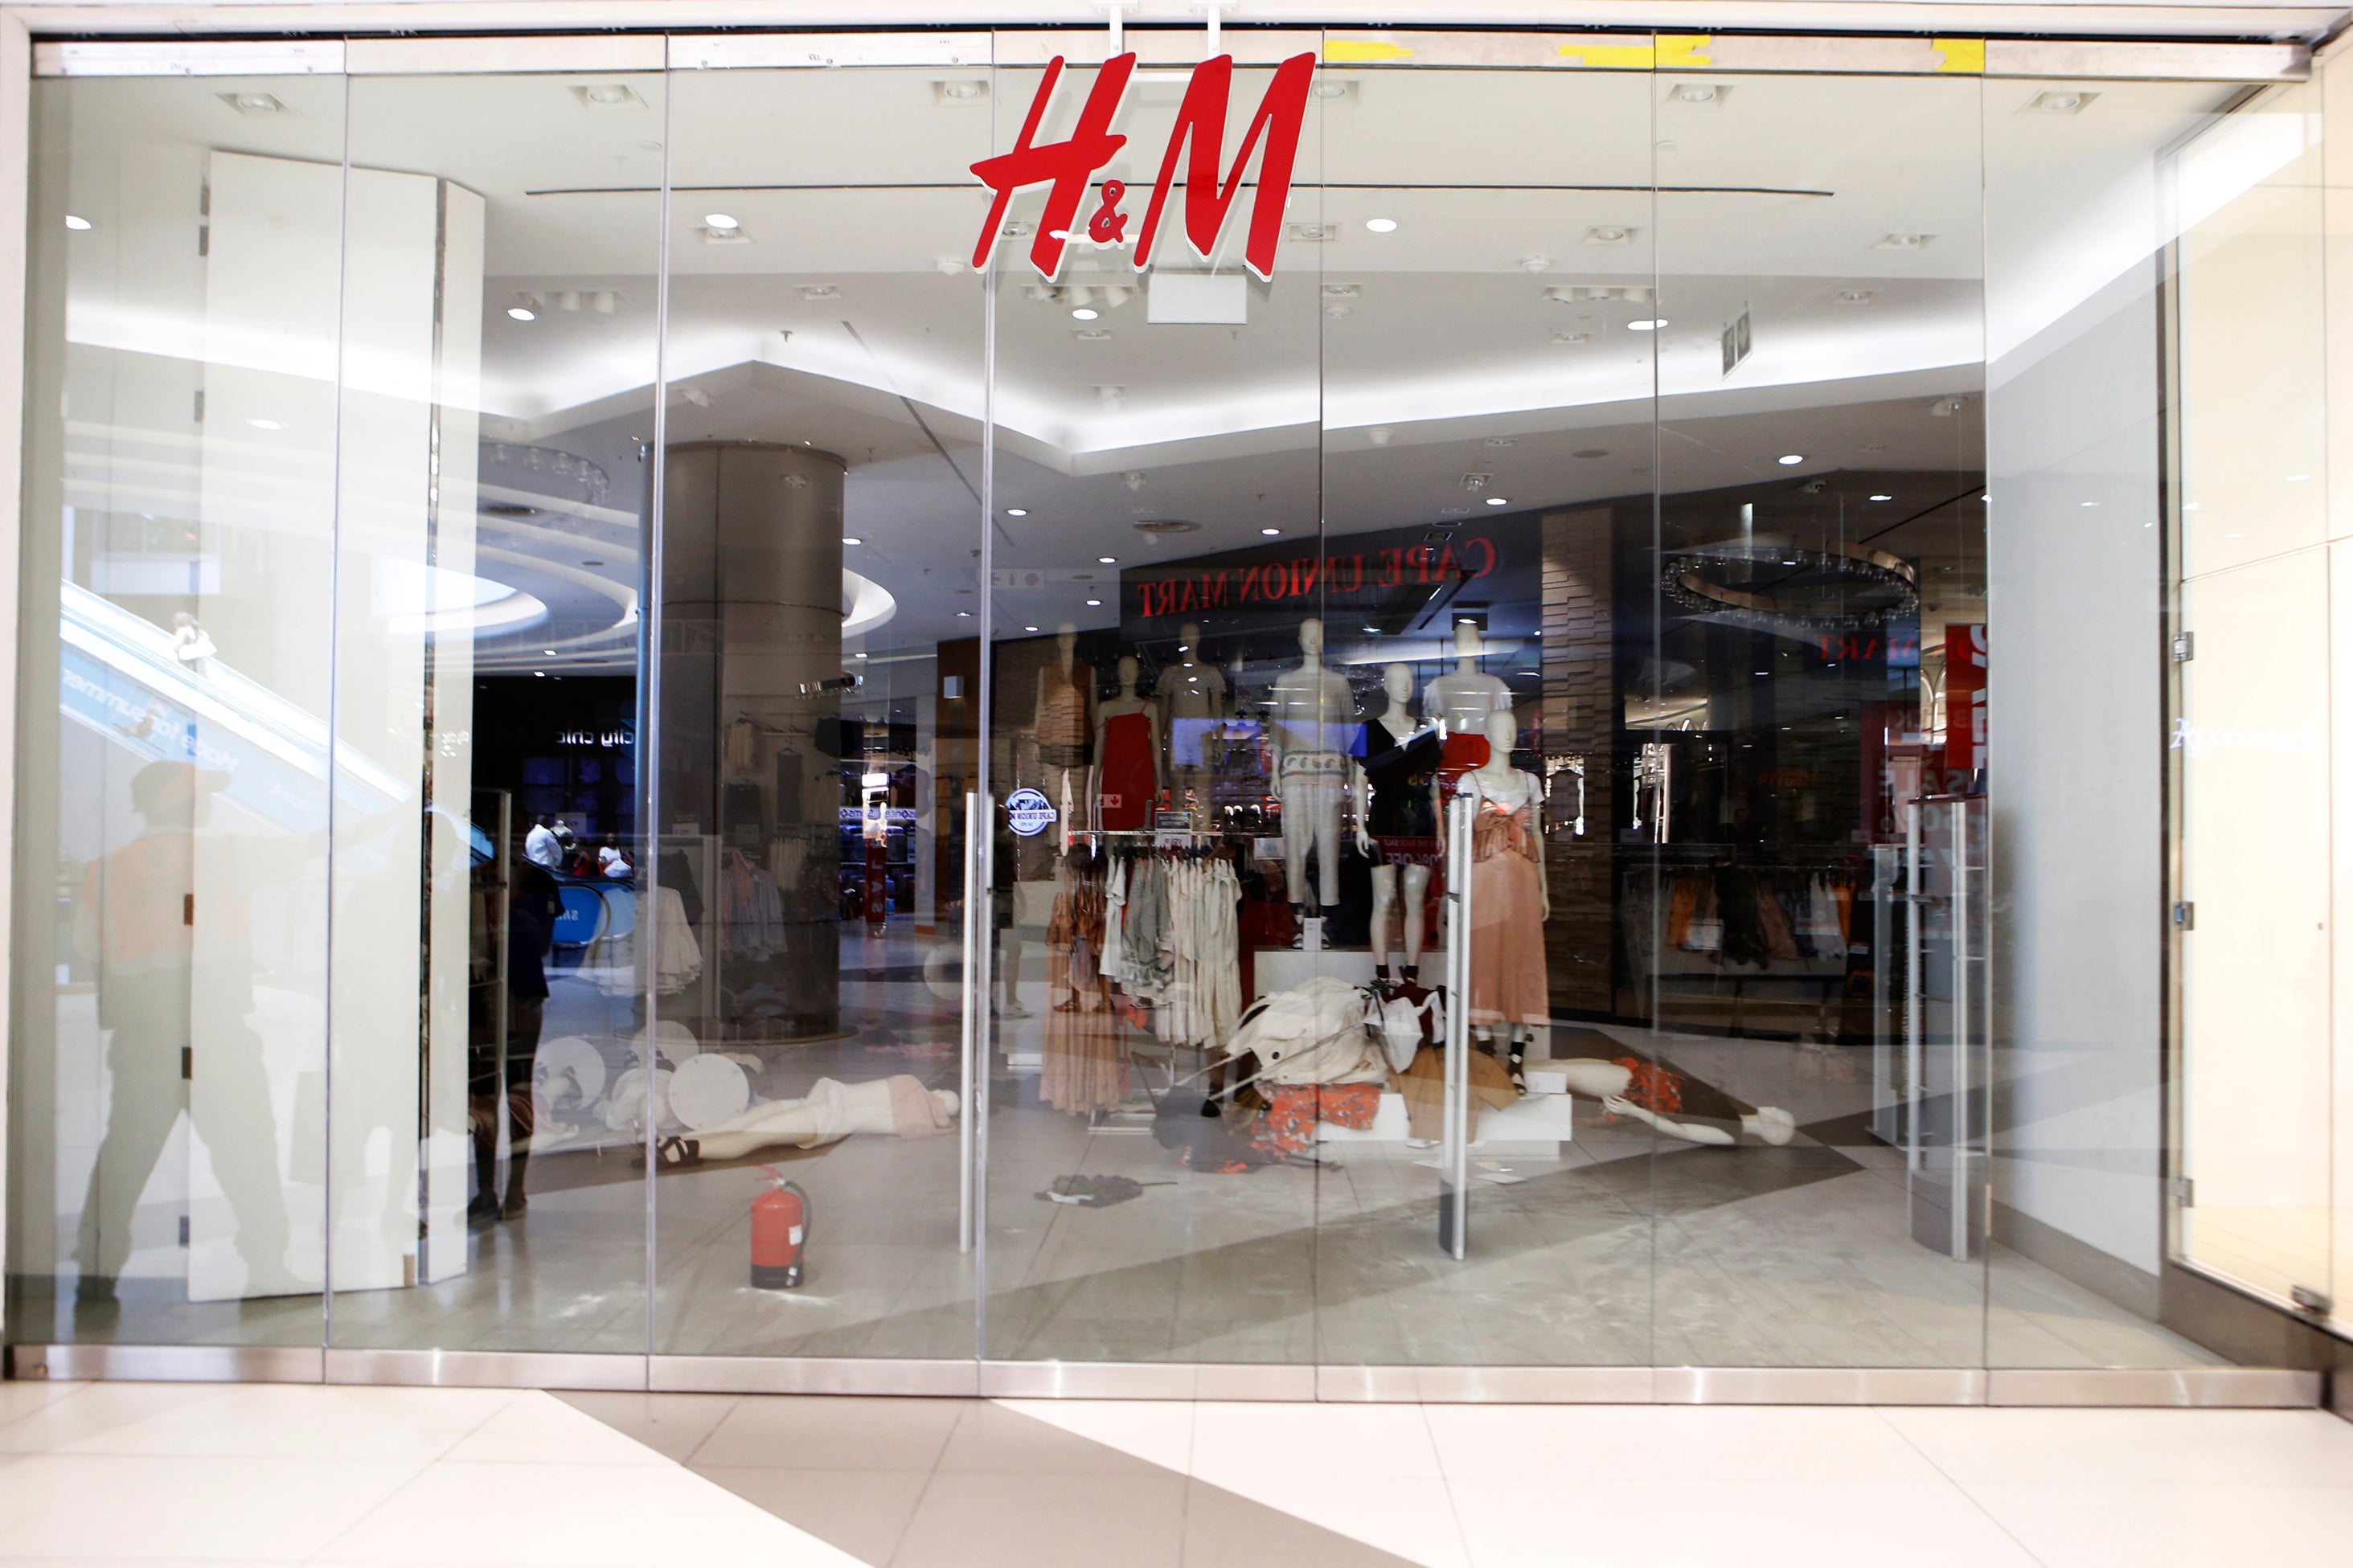 H&M South Africa Temporarily Closes Its' Stores After Vandalism From Protestors Over Racist Ad
